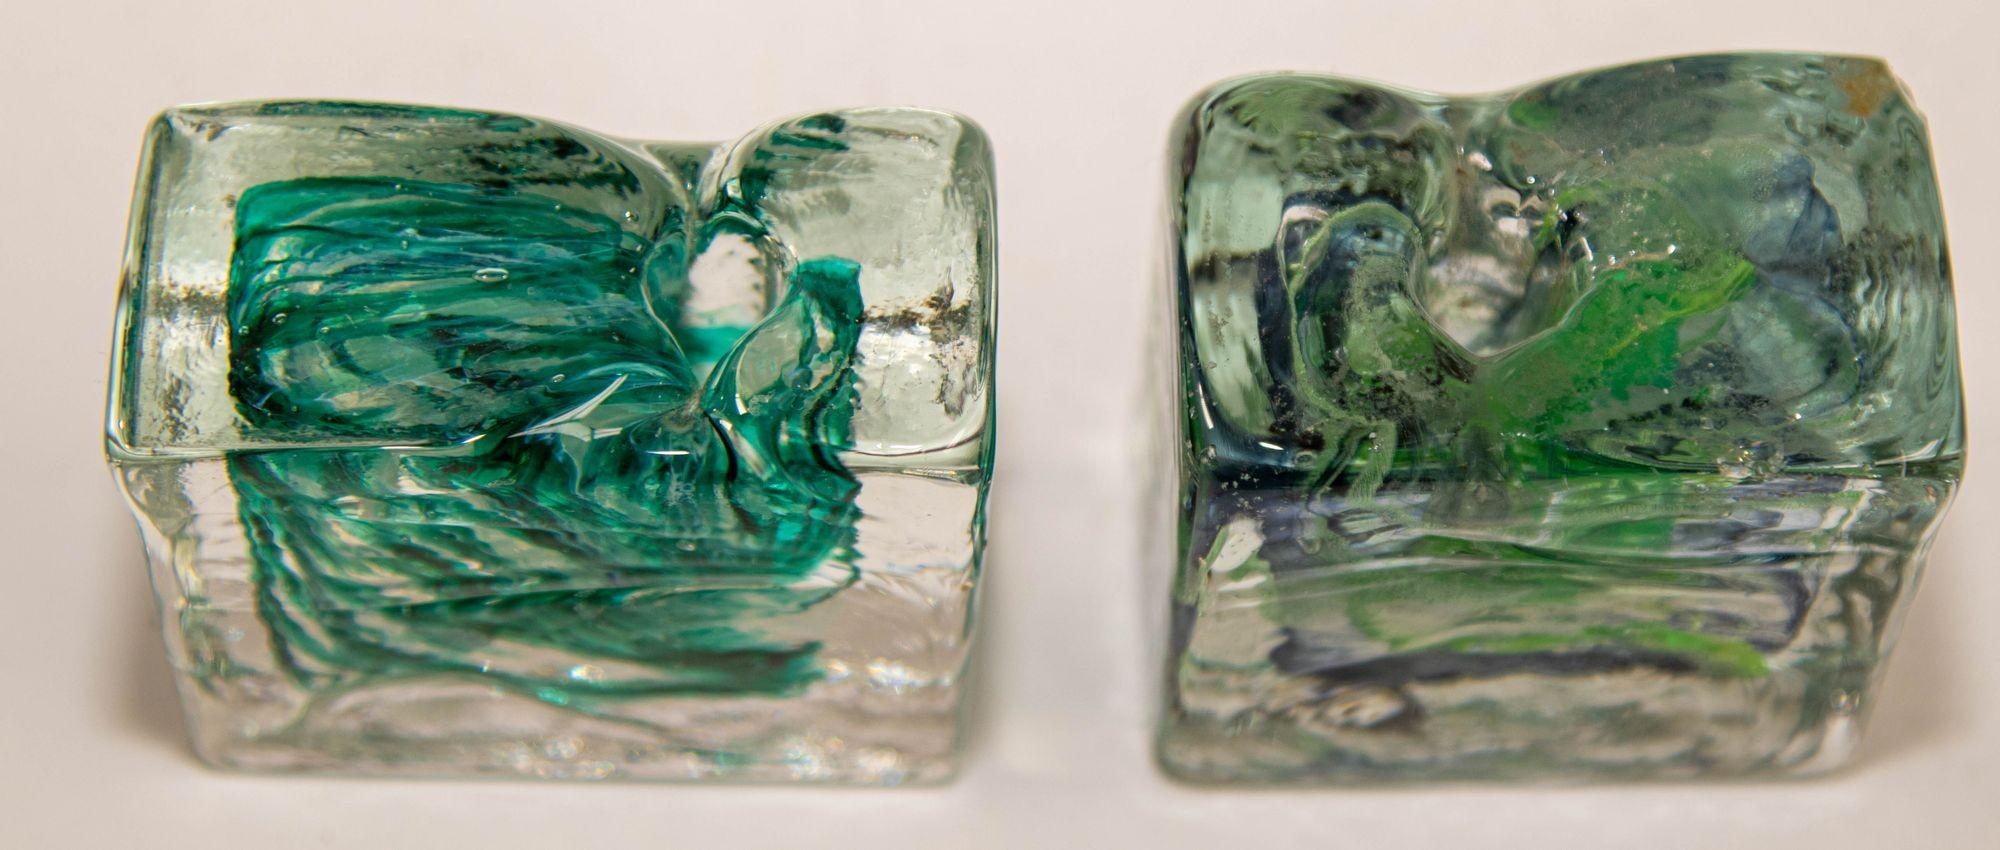 Vintage Kerry Irish Art Glass Ice Block Votive Candle Holders a Pair For Sale 6